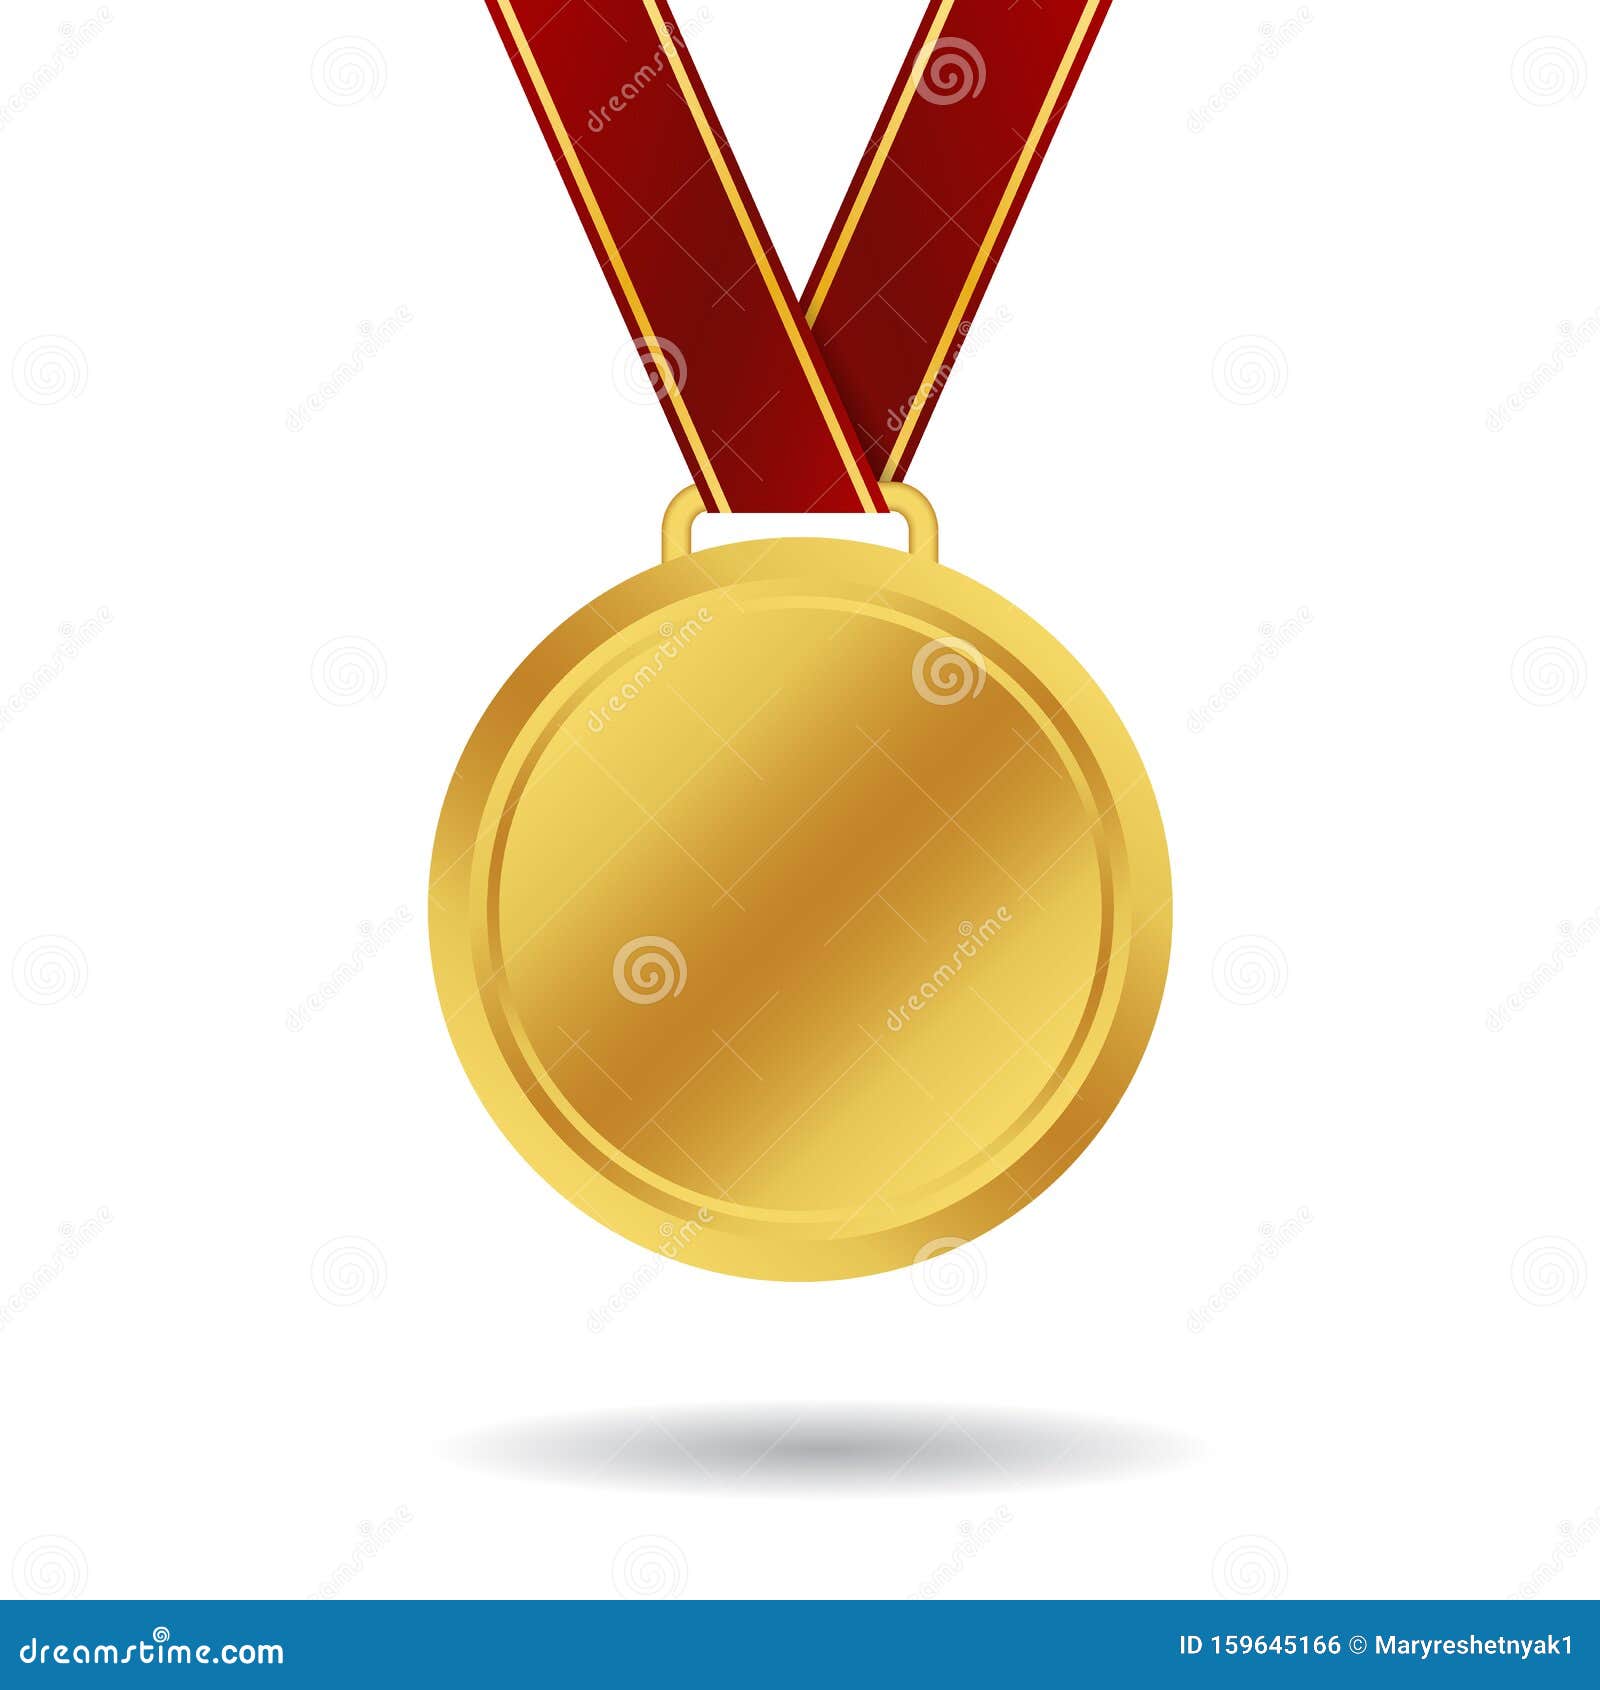 Download Realistic Gold Medal Mockup. Awarding Of The Winner With A ...